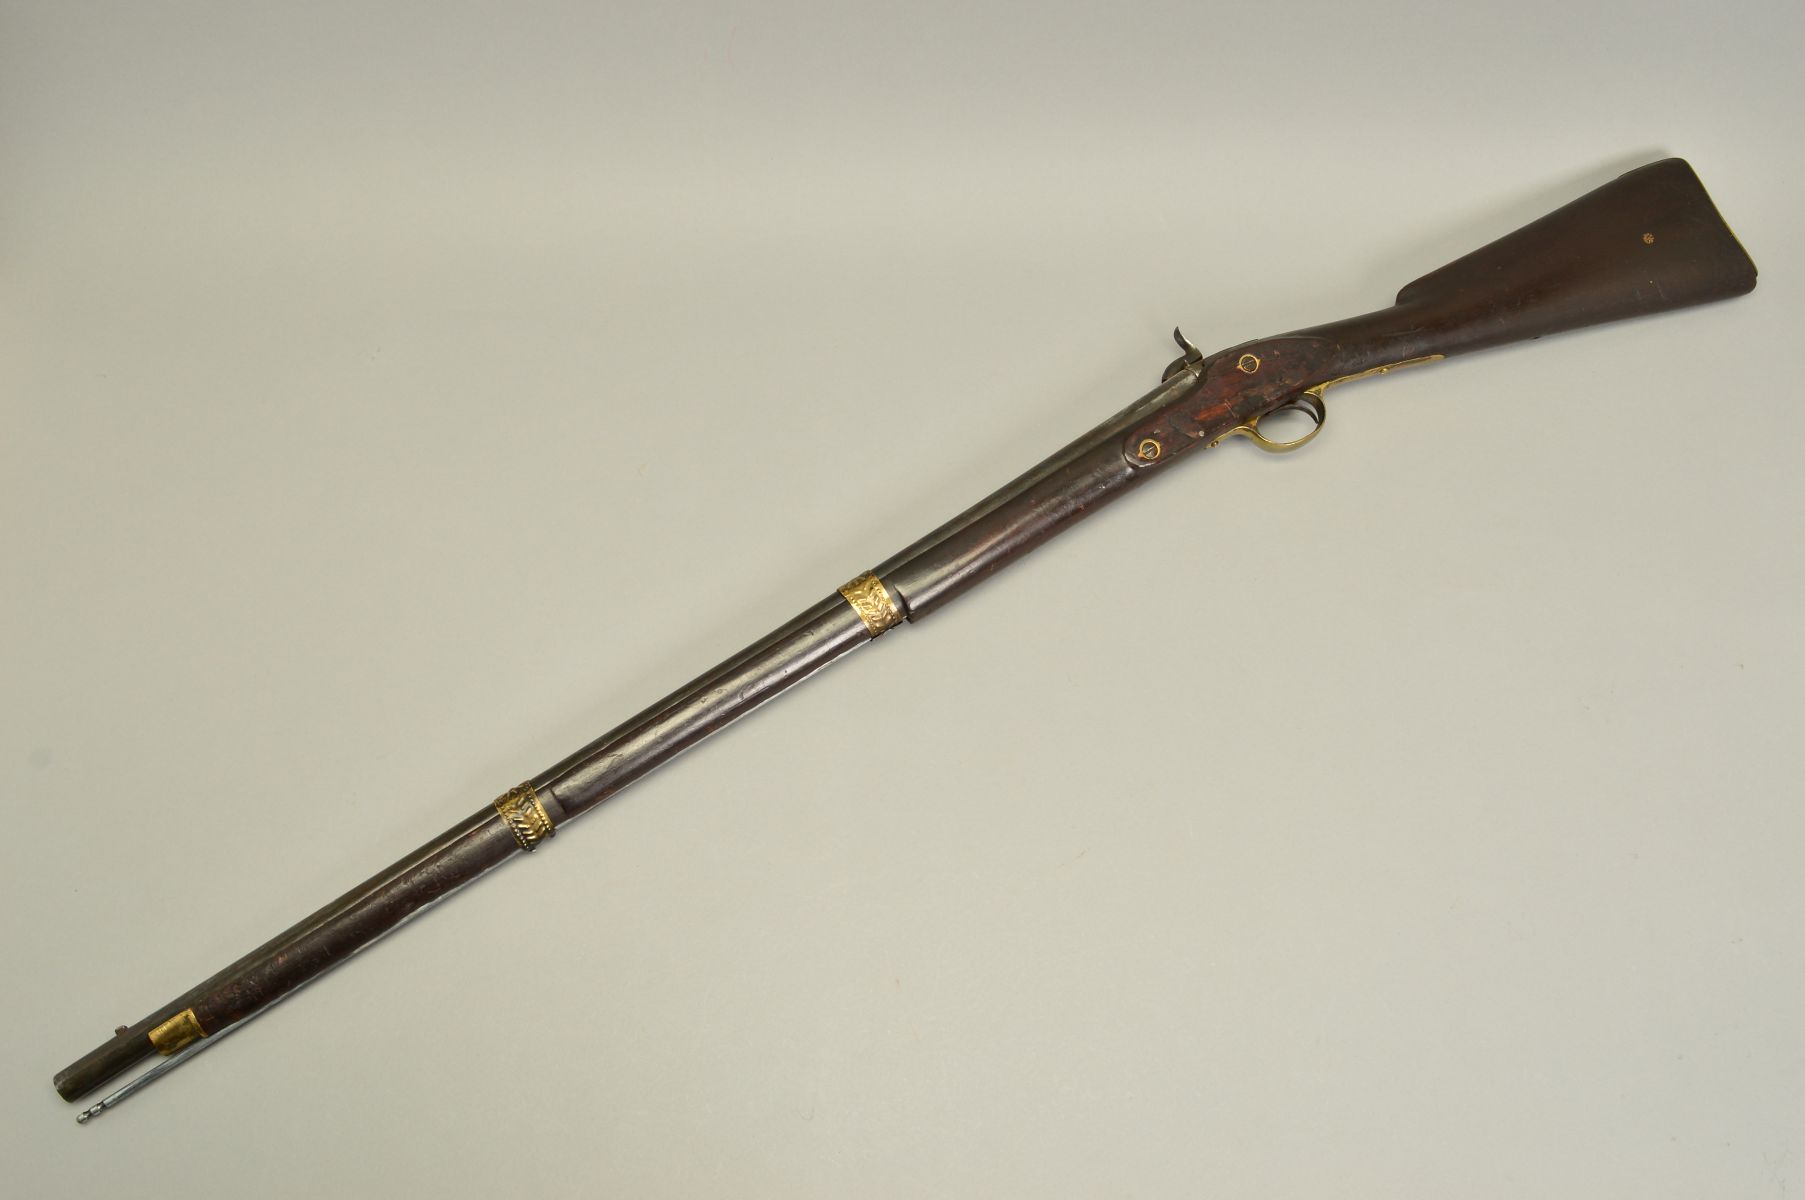 A 15 BORE 2 BAND PERCUSSION SINGLE BARREL MILITARY PATTERN MUSKET, the lock lacks the normal arsenal